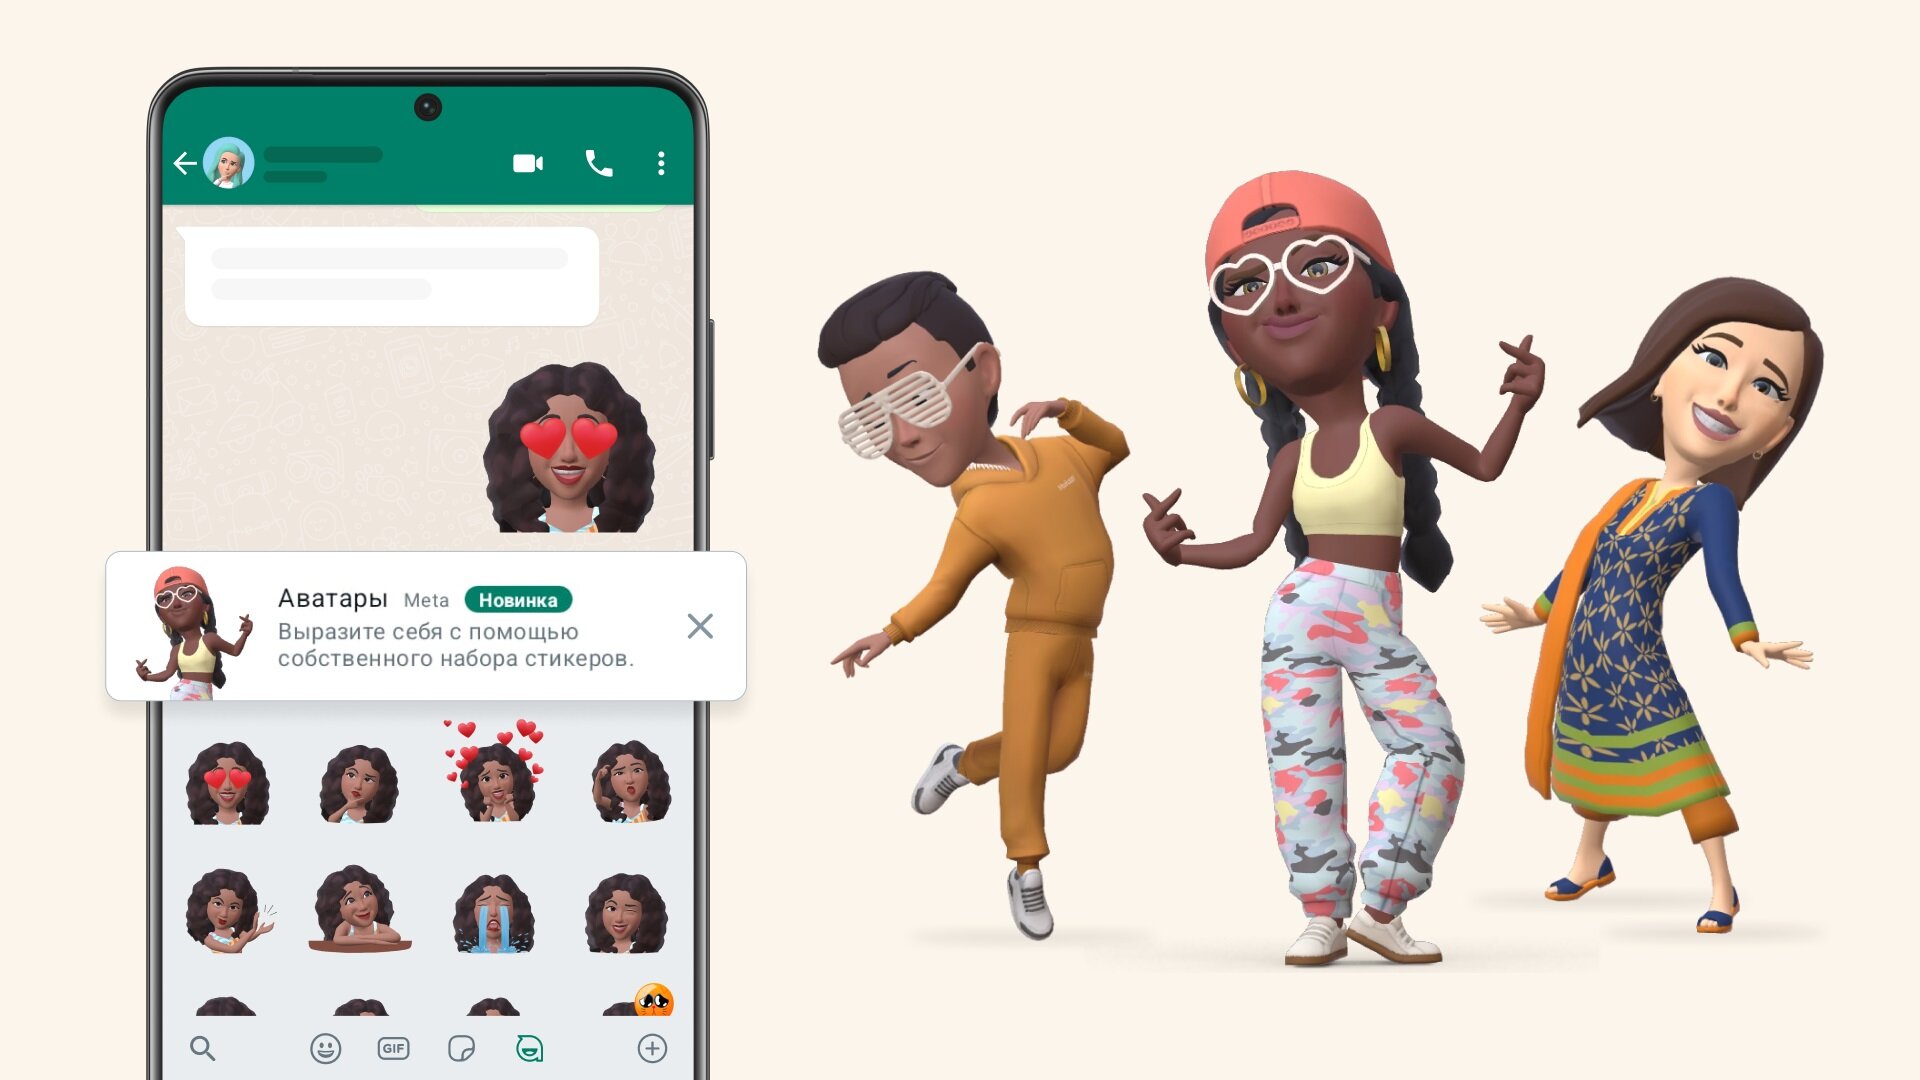 WhatsApp introduces digital avatars: for communication, expression of emotions and more